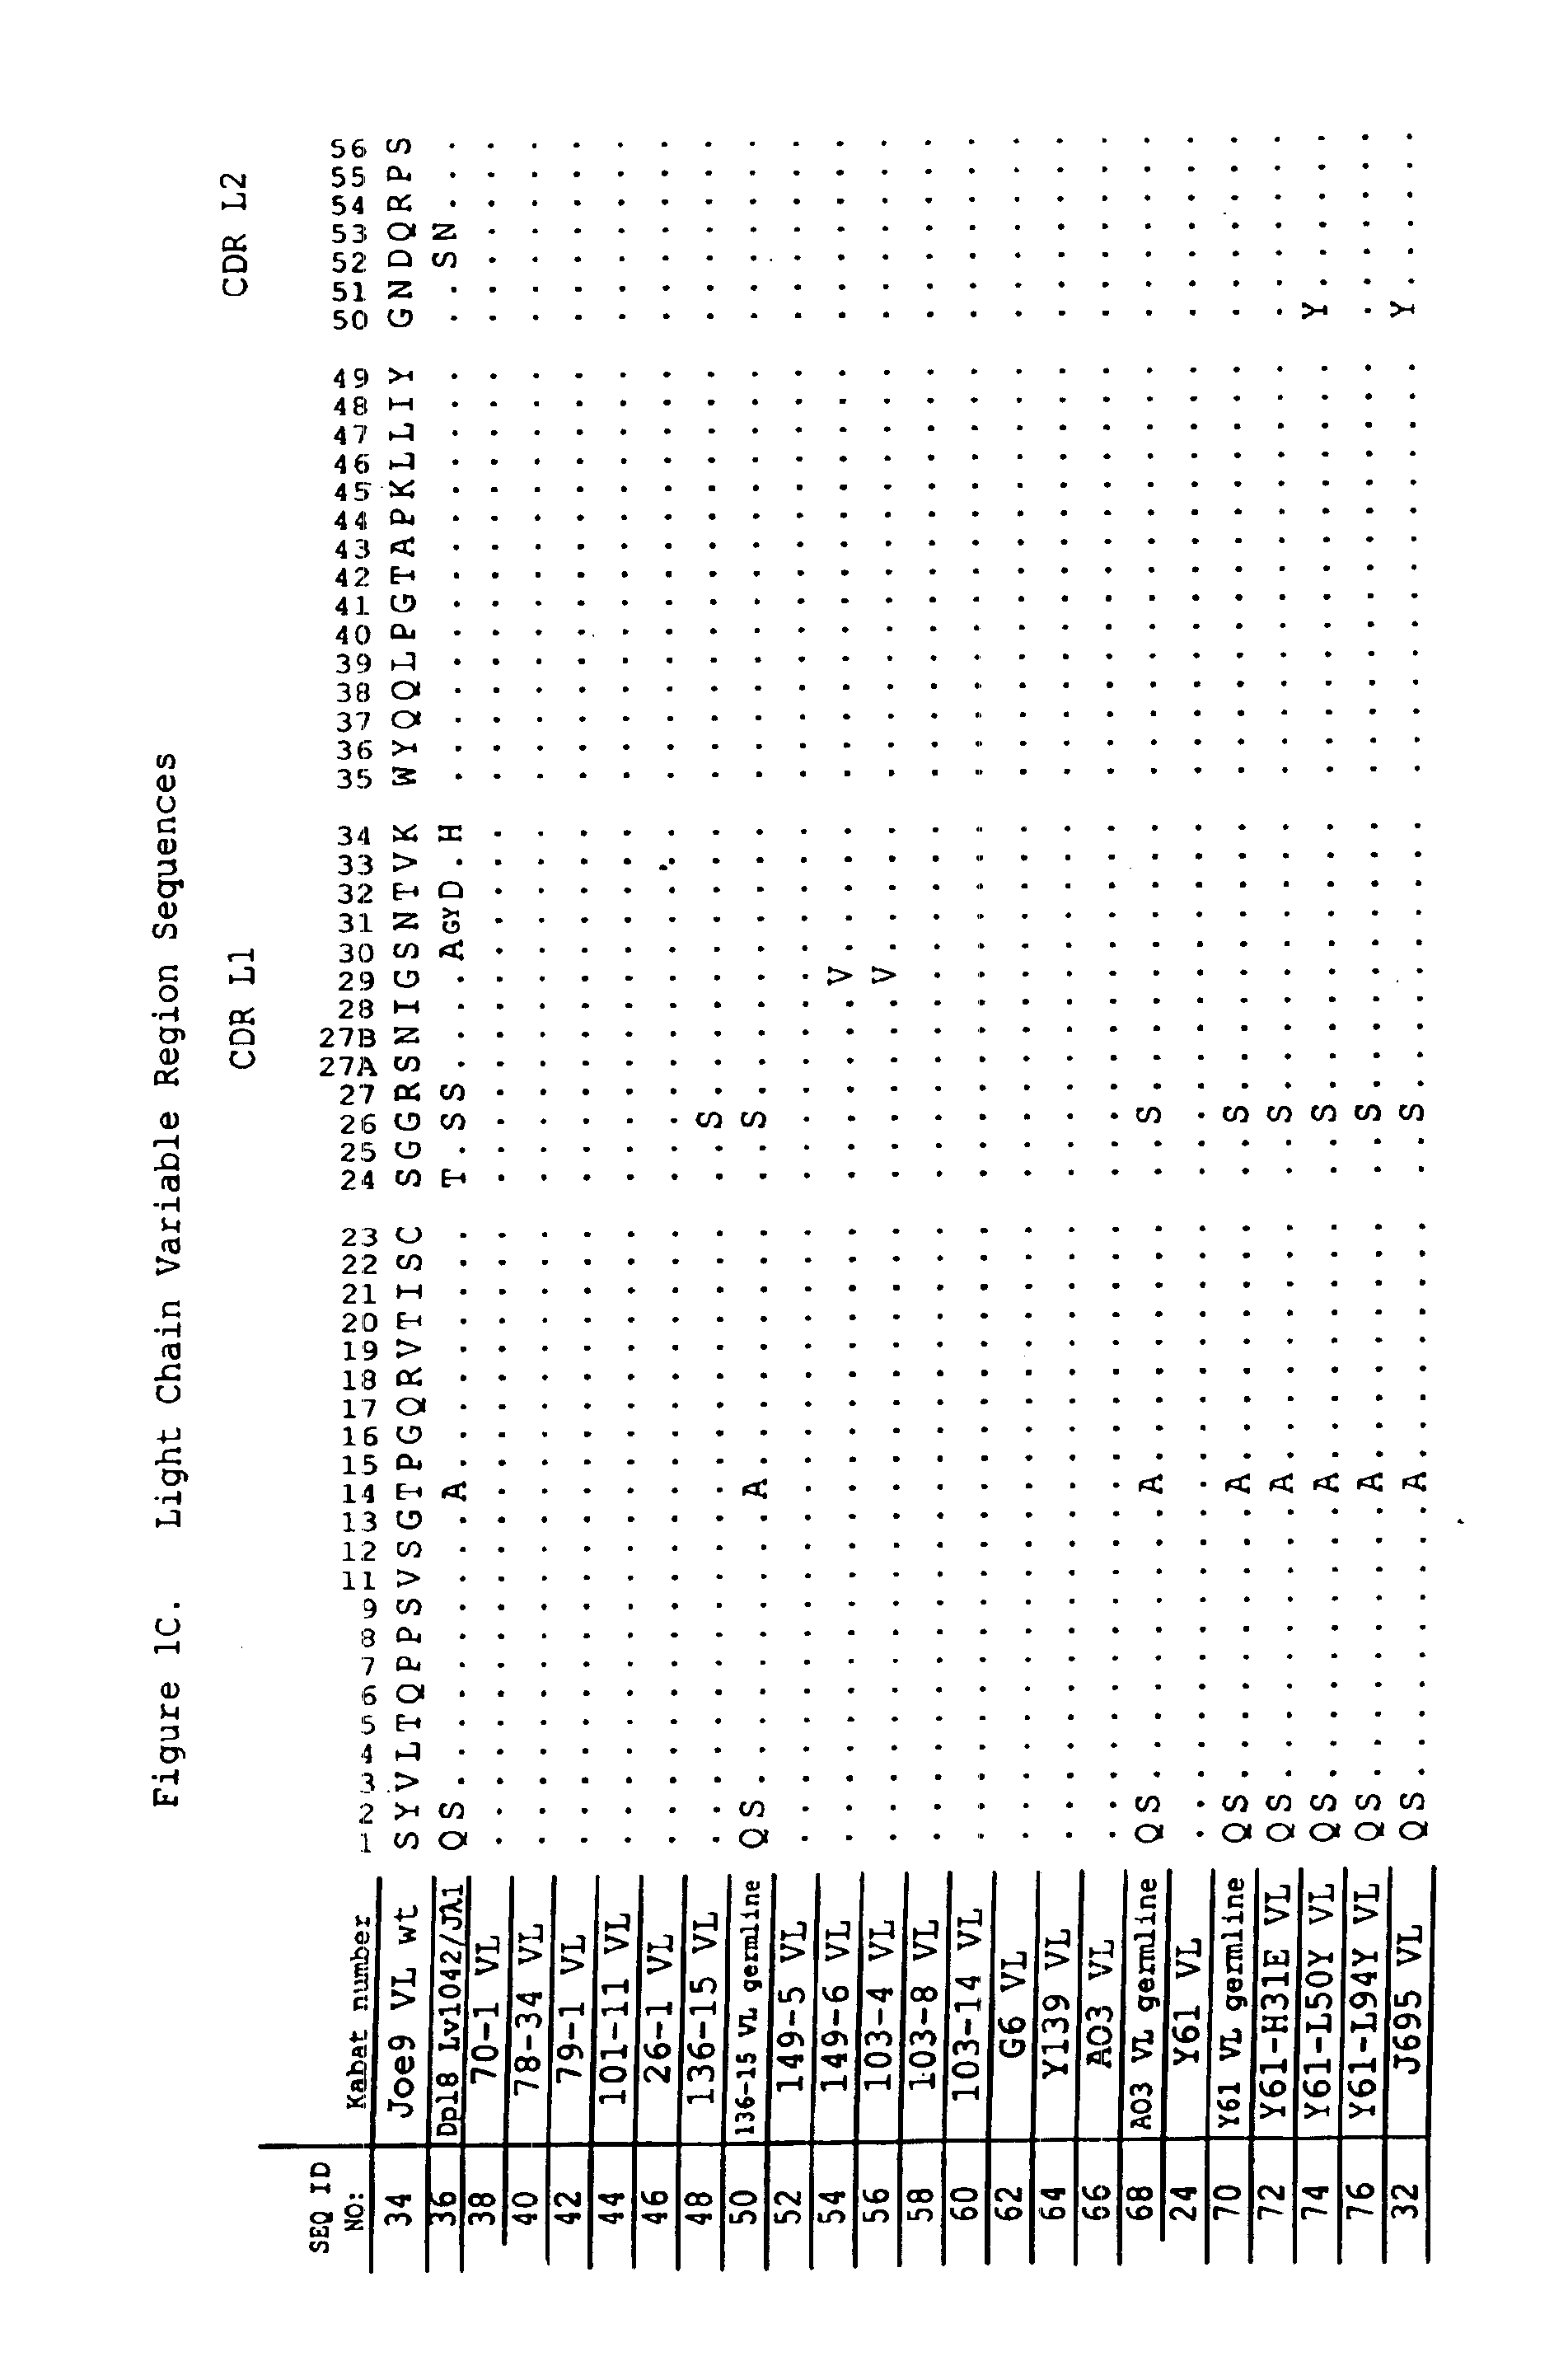 Human antibodies that bind human IL-12 and methods for producing